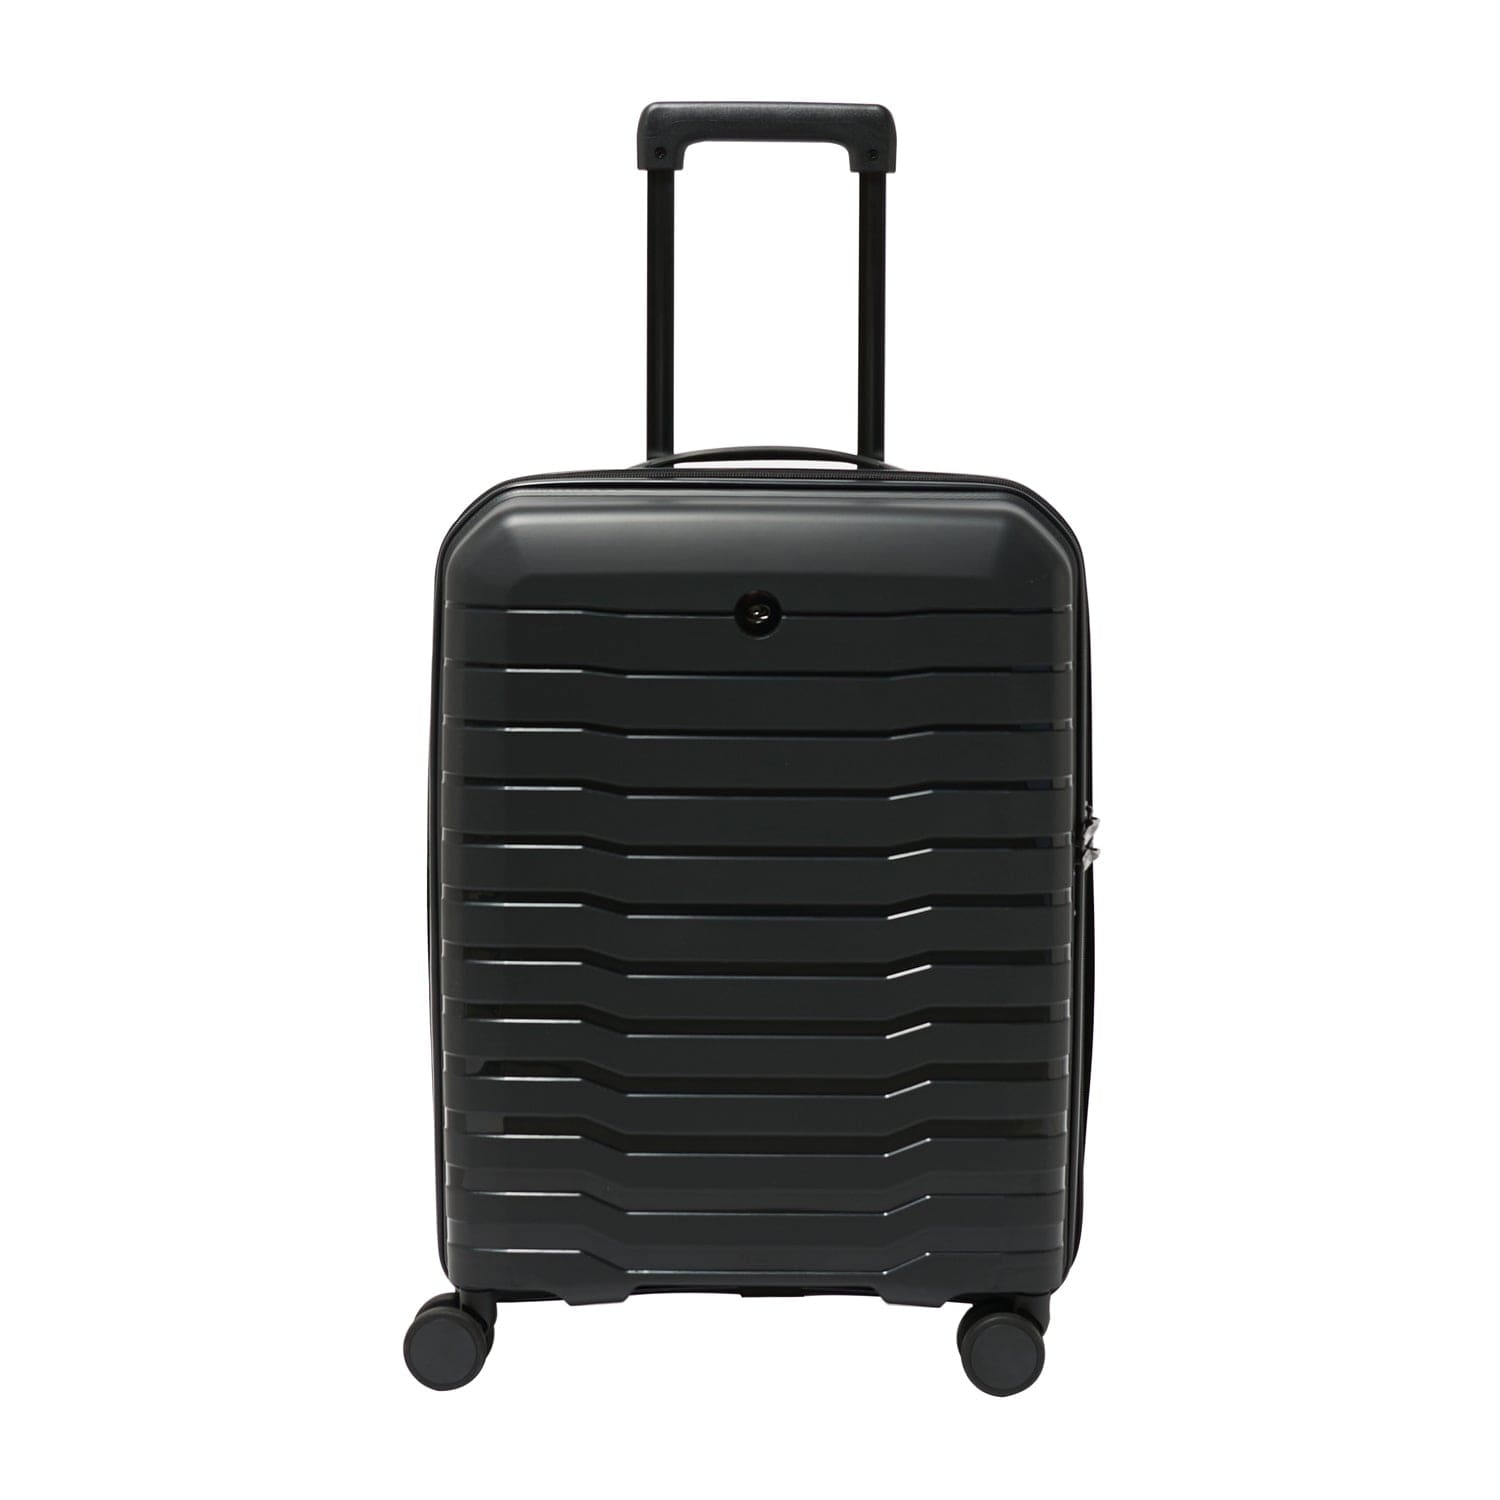 Echolac Lordnorth 58cm Hardcase Expandable 4 Double Wheel Cabin Luggage Trolley Black - PPT008 - 20 BLACK